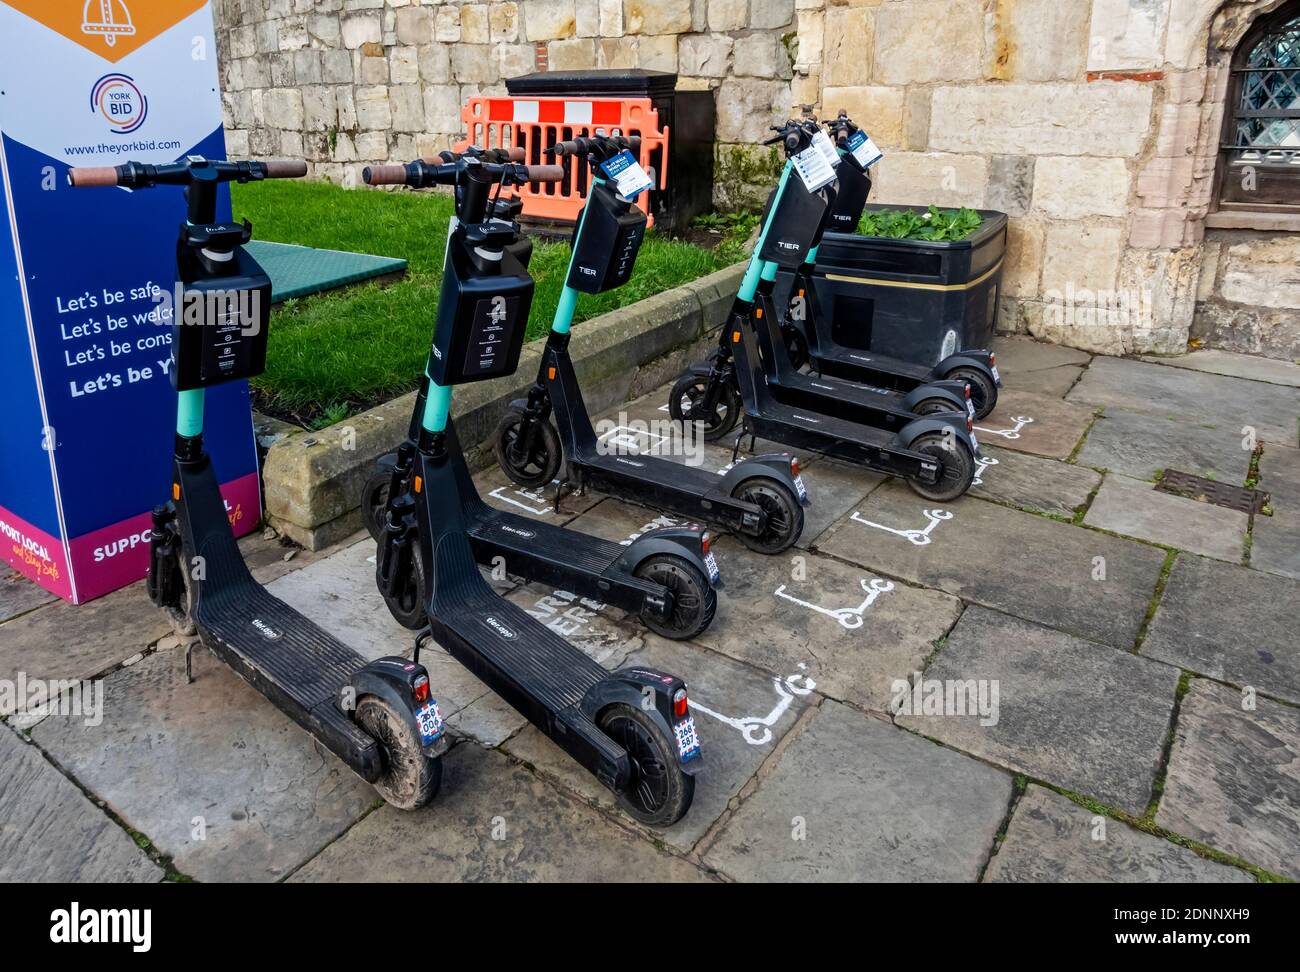 TIER E-scooters E scooter electric scooters for hire in city town centre York North Yorkshire England UK United Kingdom GB Great Britain Stock Photo